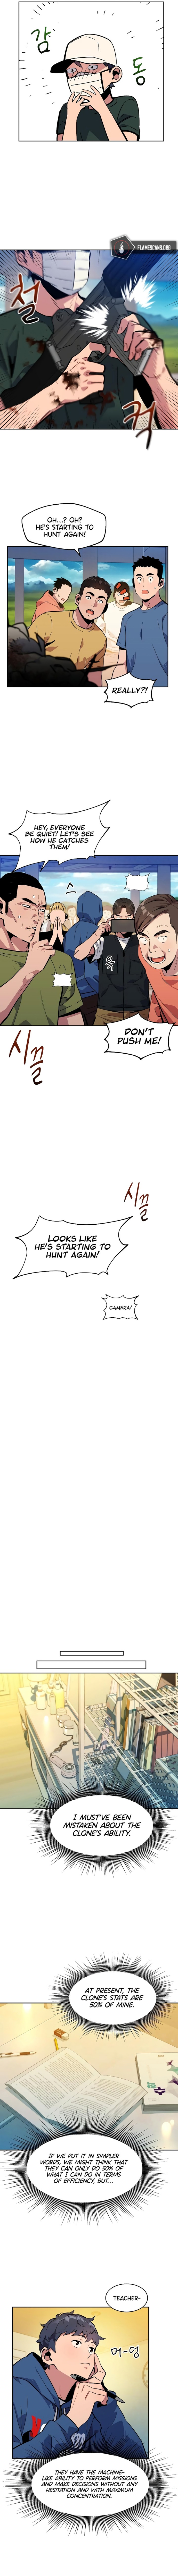 Auto-Hunting With Clones - Chapter 11 Page 8